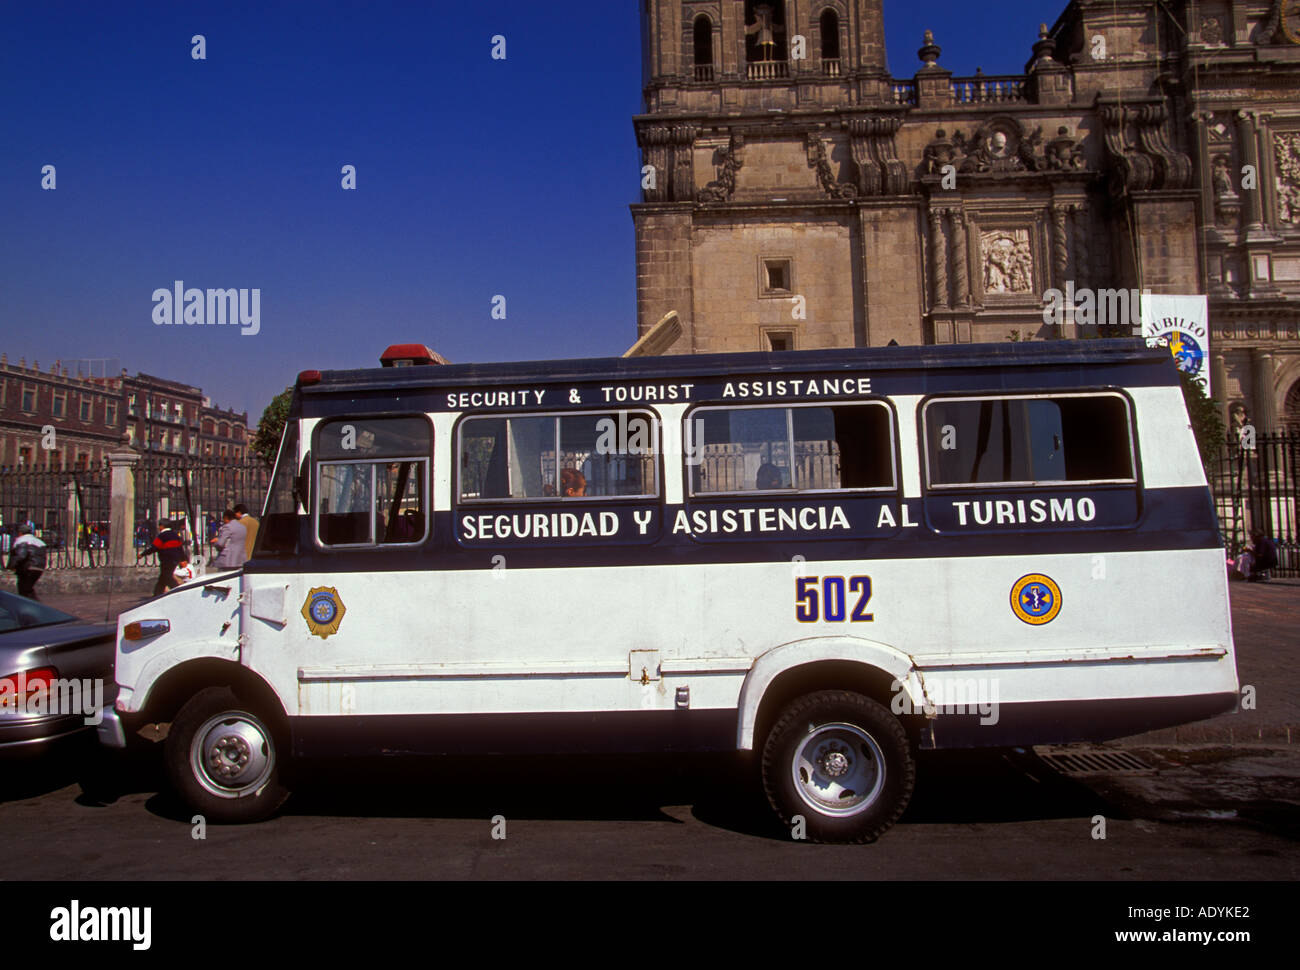 police van, Security and Tourist Assistance, Zocalo, Mexico City, Federal District, Mexico Stock Photo